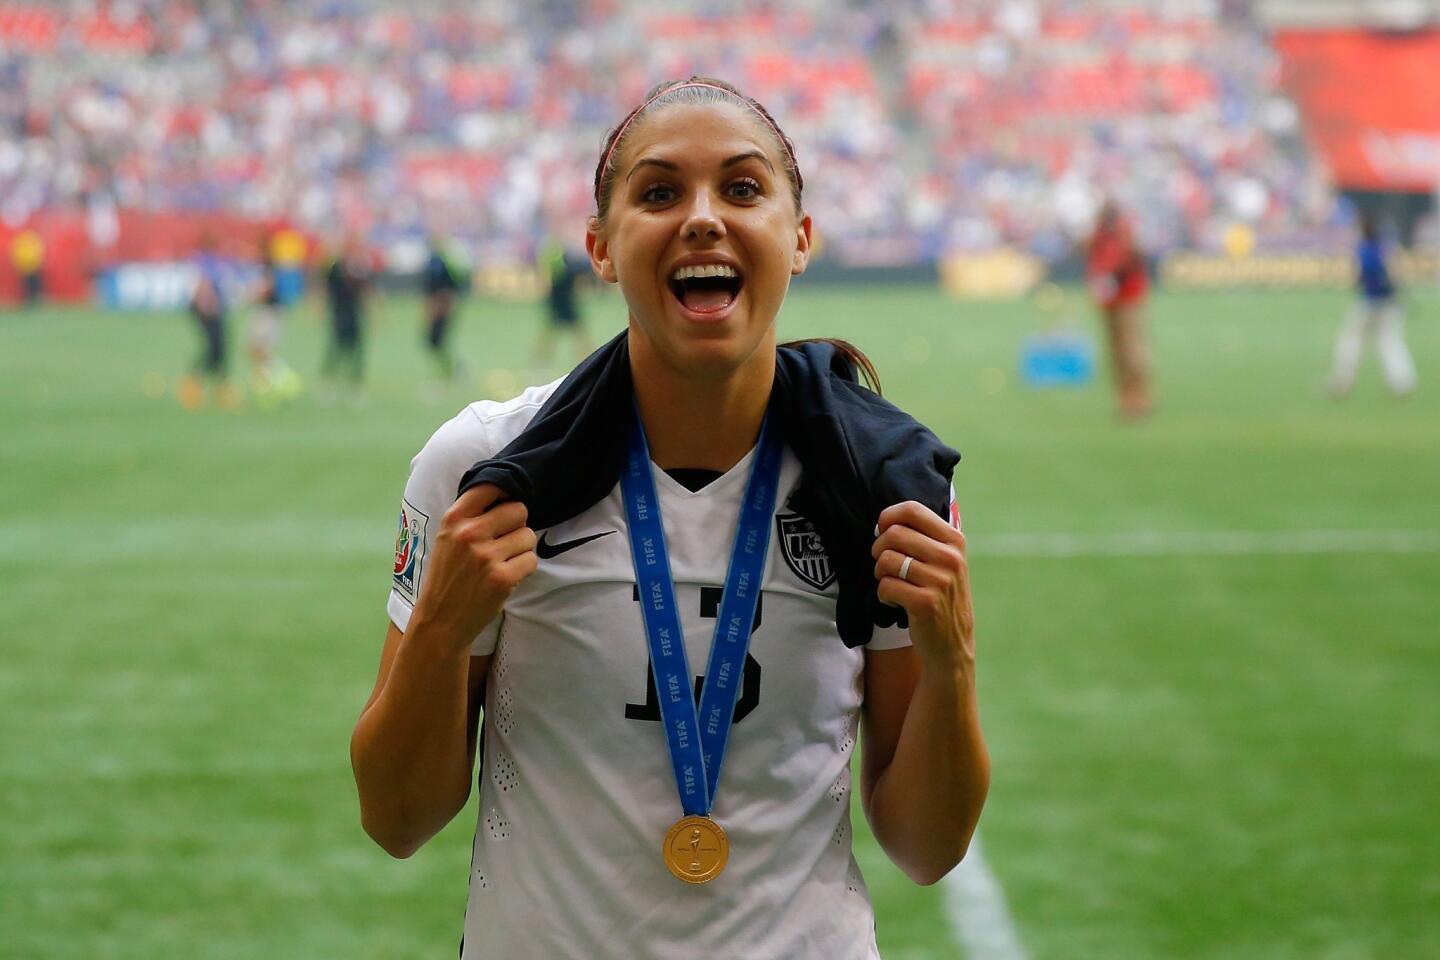 VANCOUVER, BC - JULY 05: Alex Morgan #13 of the United States celebrates the 5-2 victory against Japan in the FIFA Women's World Cup Canada 2015 Final at BC Place Stadium on July 5, 2015 in Vancouver, Canada. (Photo by Kevin C. Cox/Getty Images) ** OUTS - ELSENT, FPG - OUTS * NM, PH, VA if sourced by CT, LA or MoD **